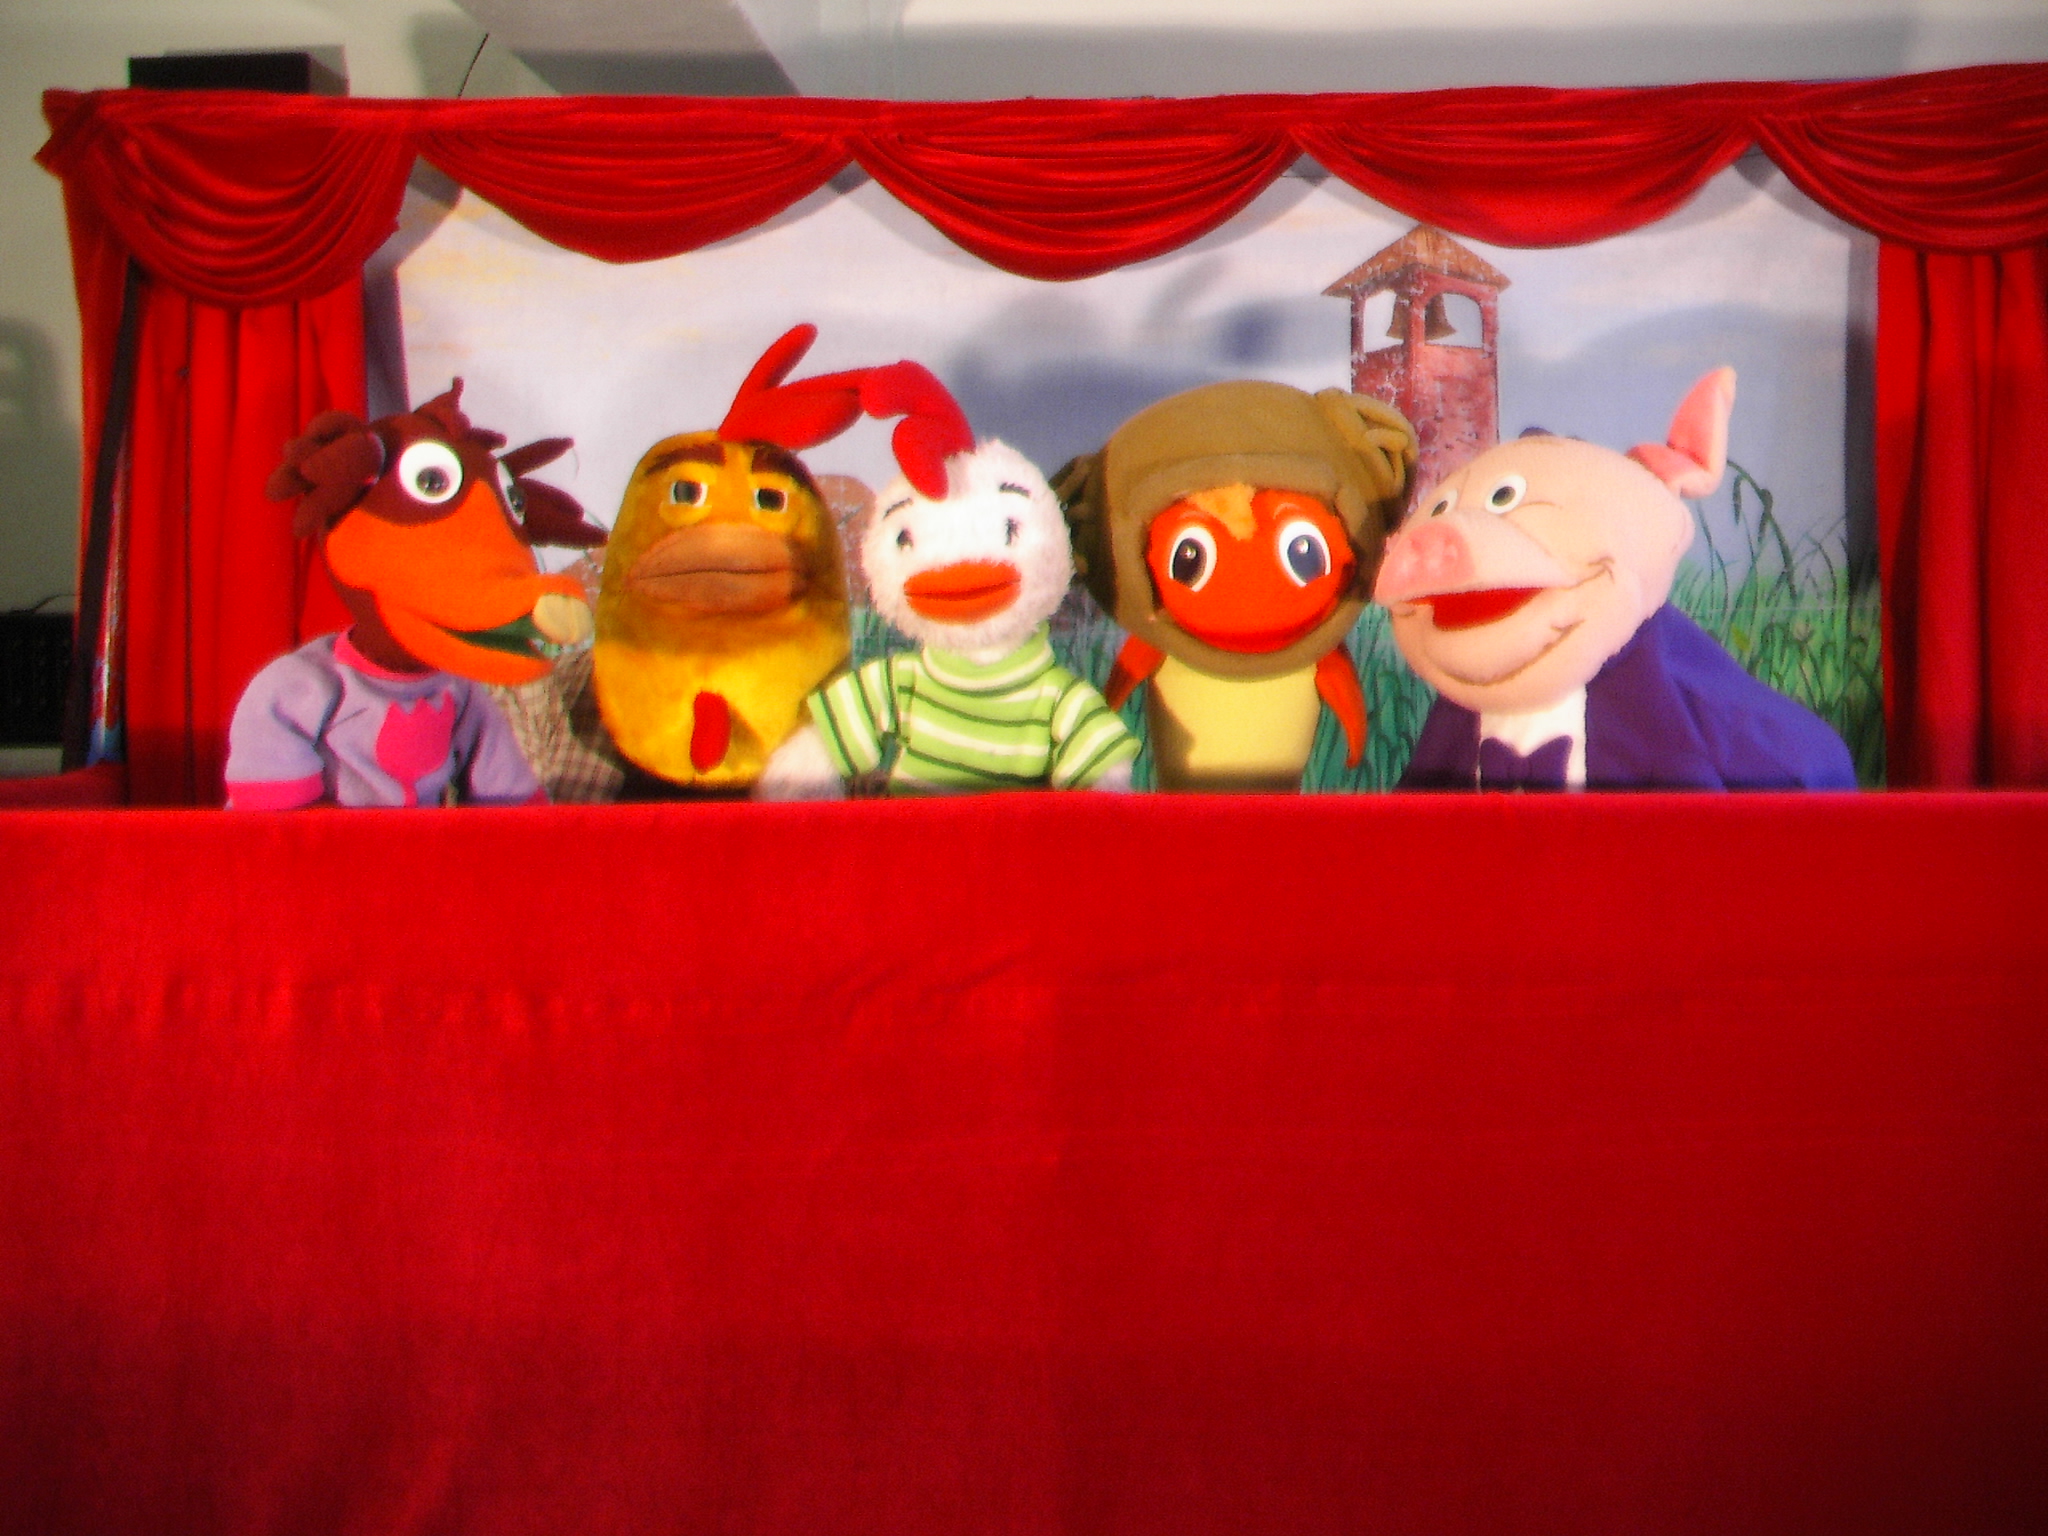 Top 5 Places To See Puppets Around The World - Puppet Dream